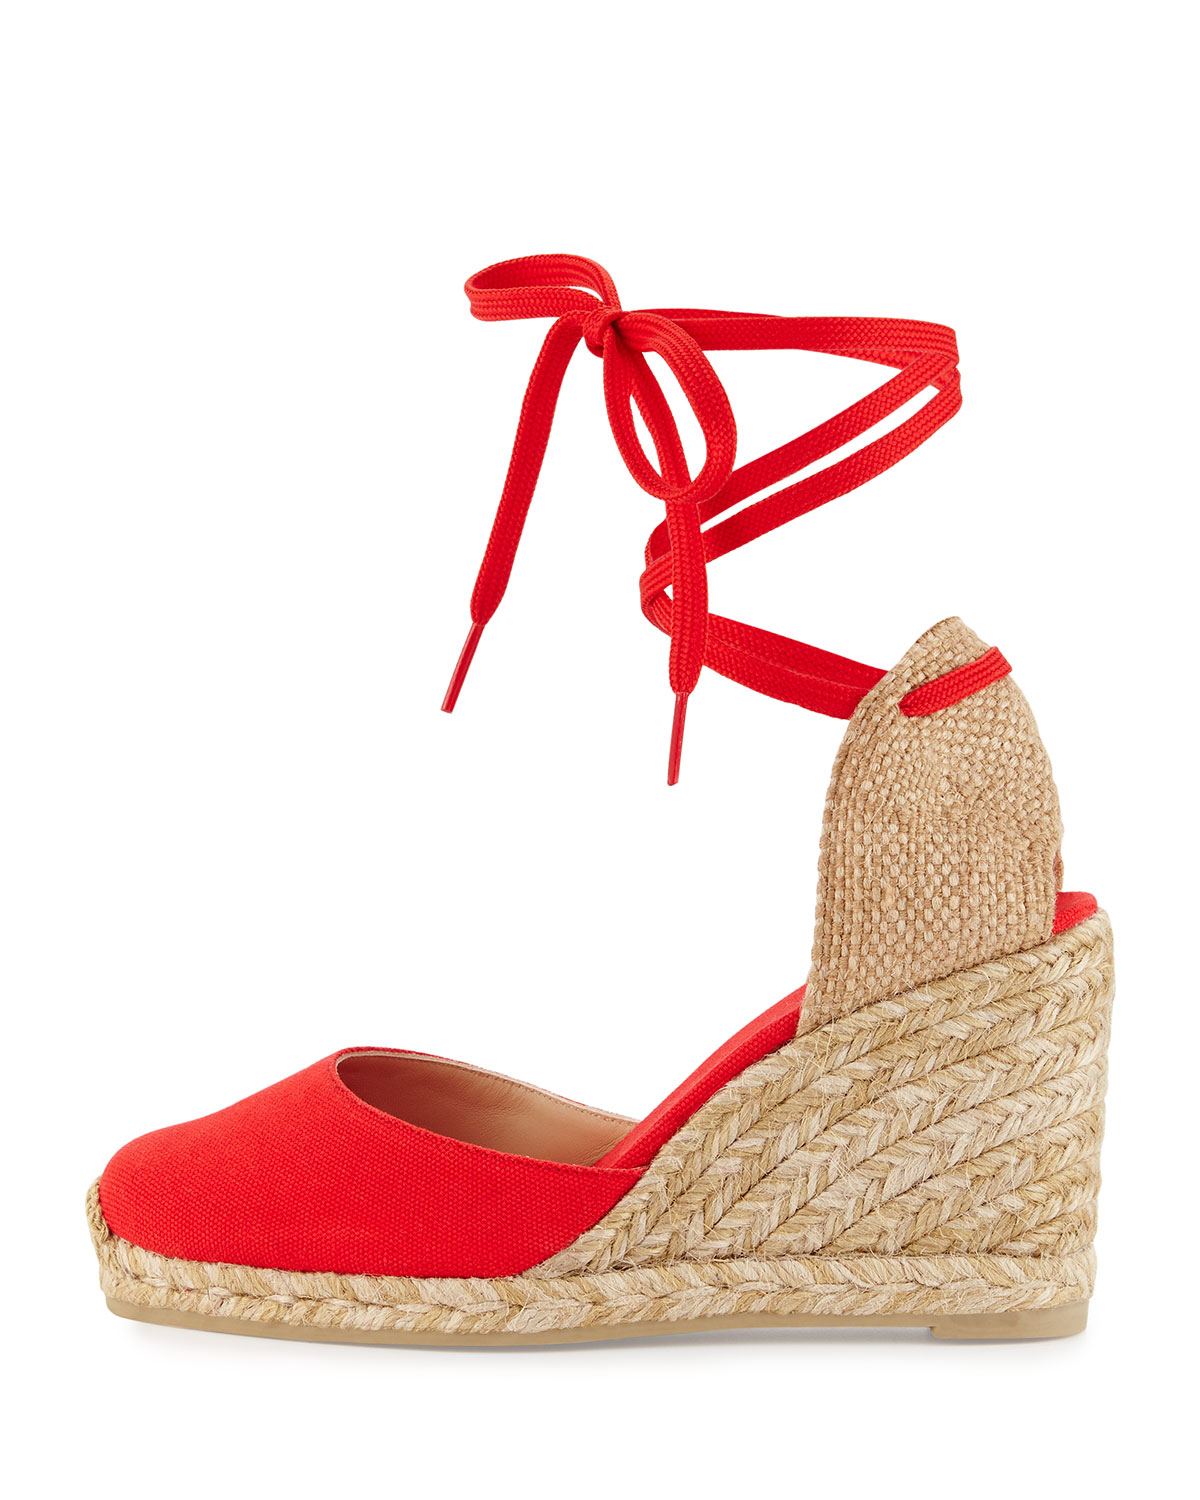 Castaner Carina Canvas Espadrille Wedge in Red - Lyst